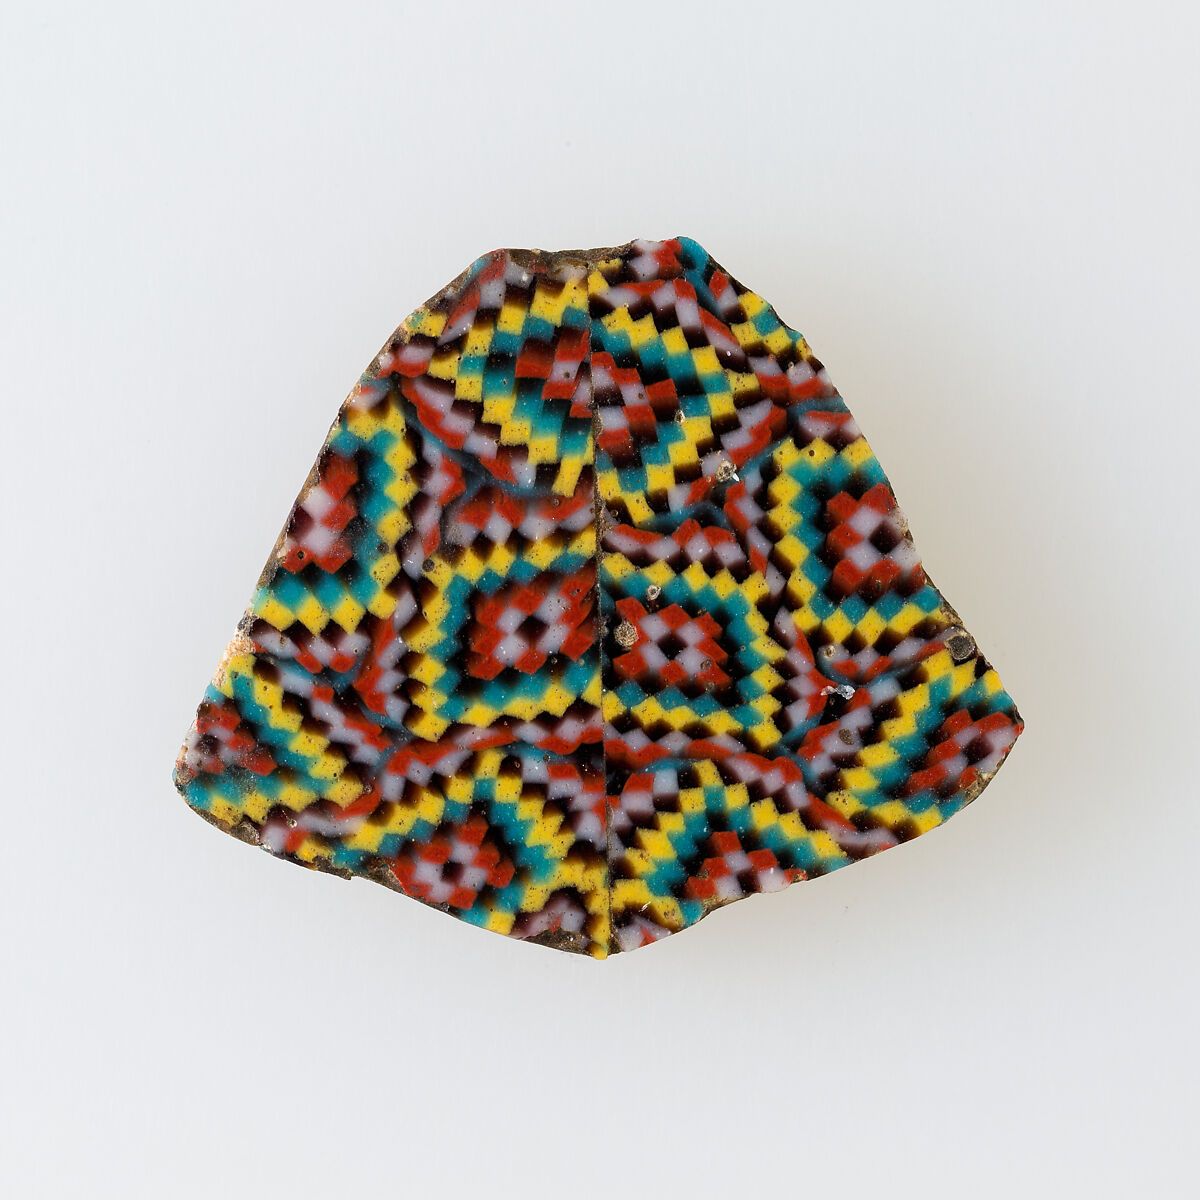 Inlay fragment, small colored squares forming a diamond pattern, Glass 